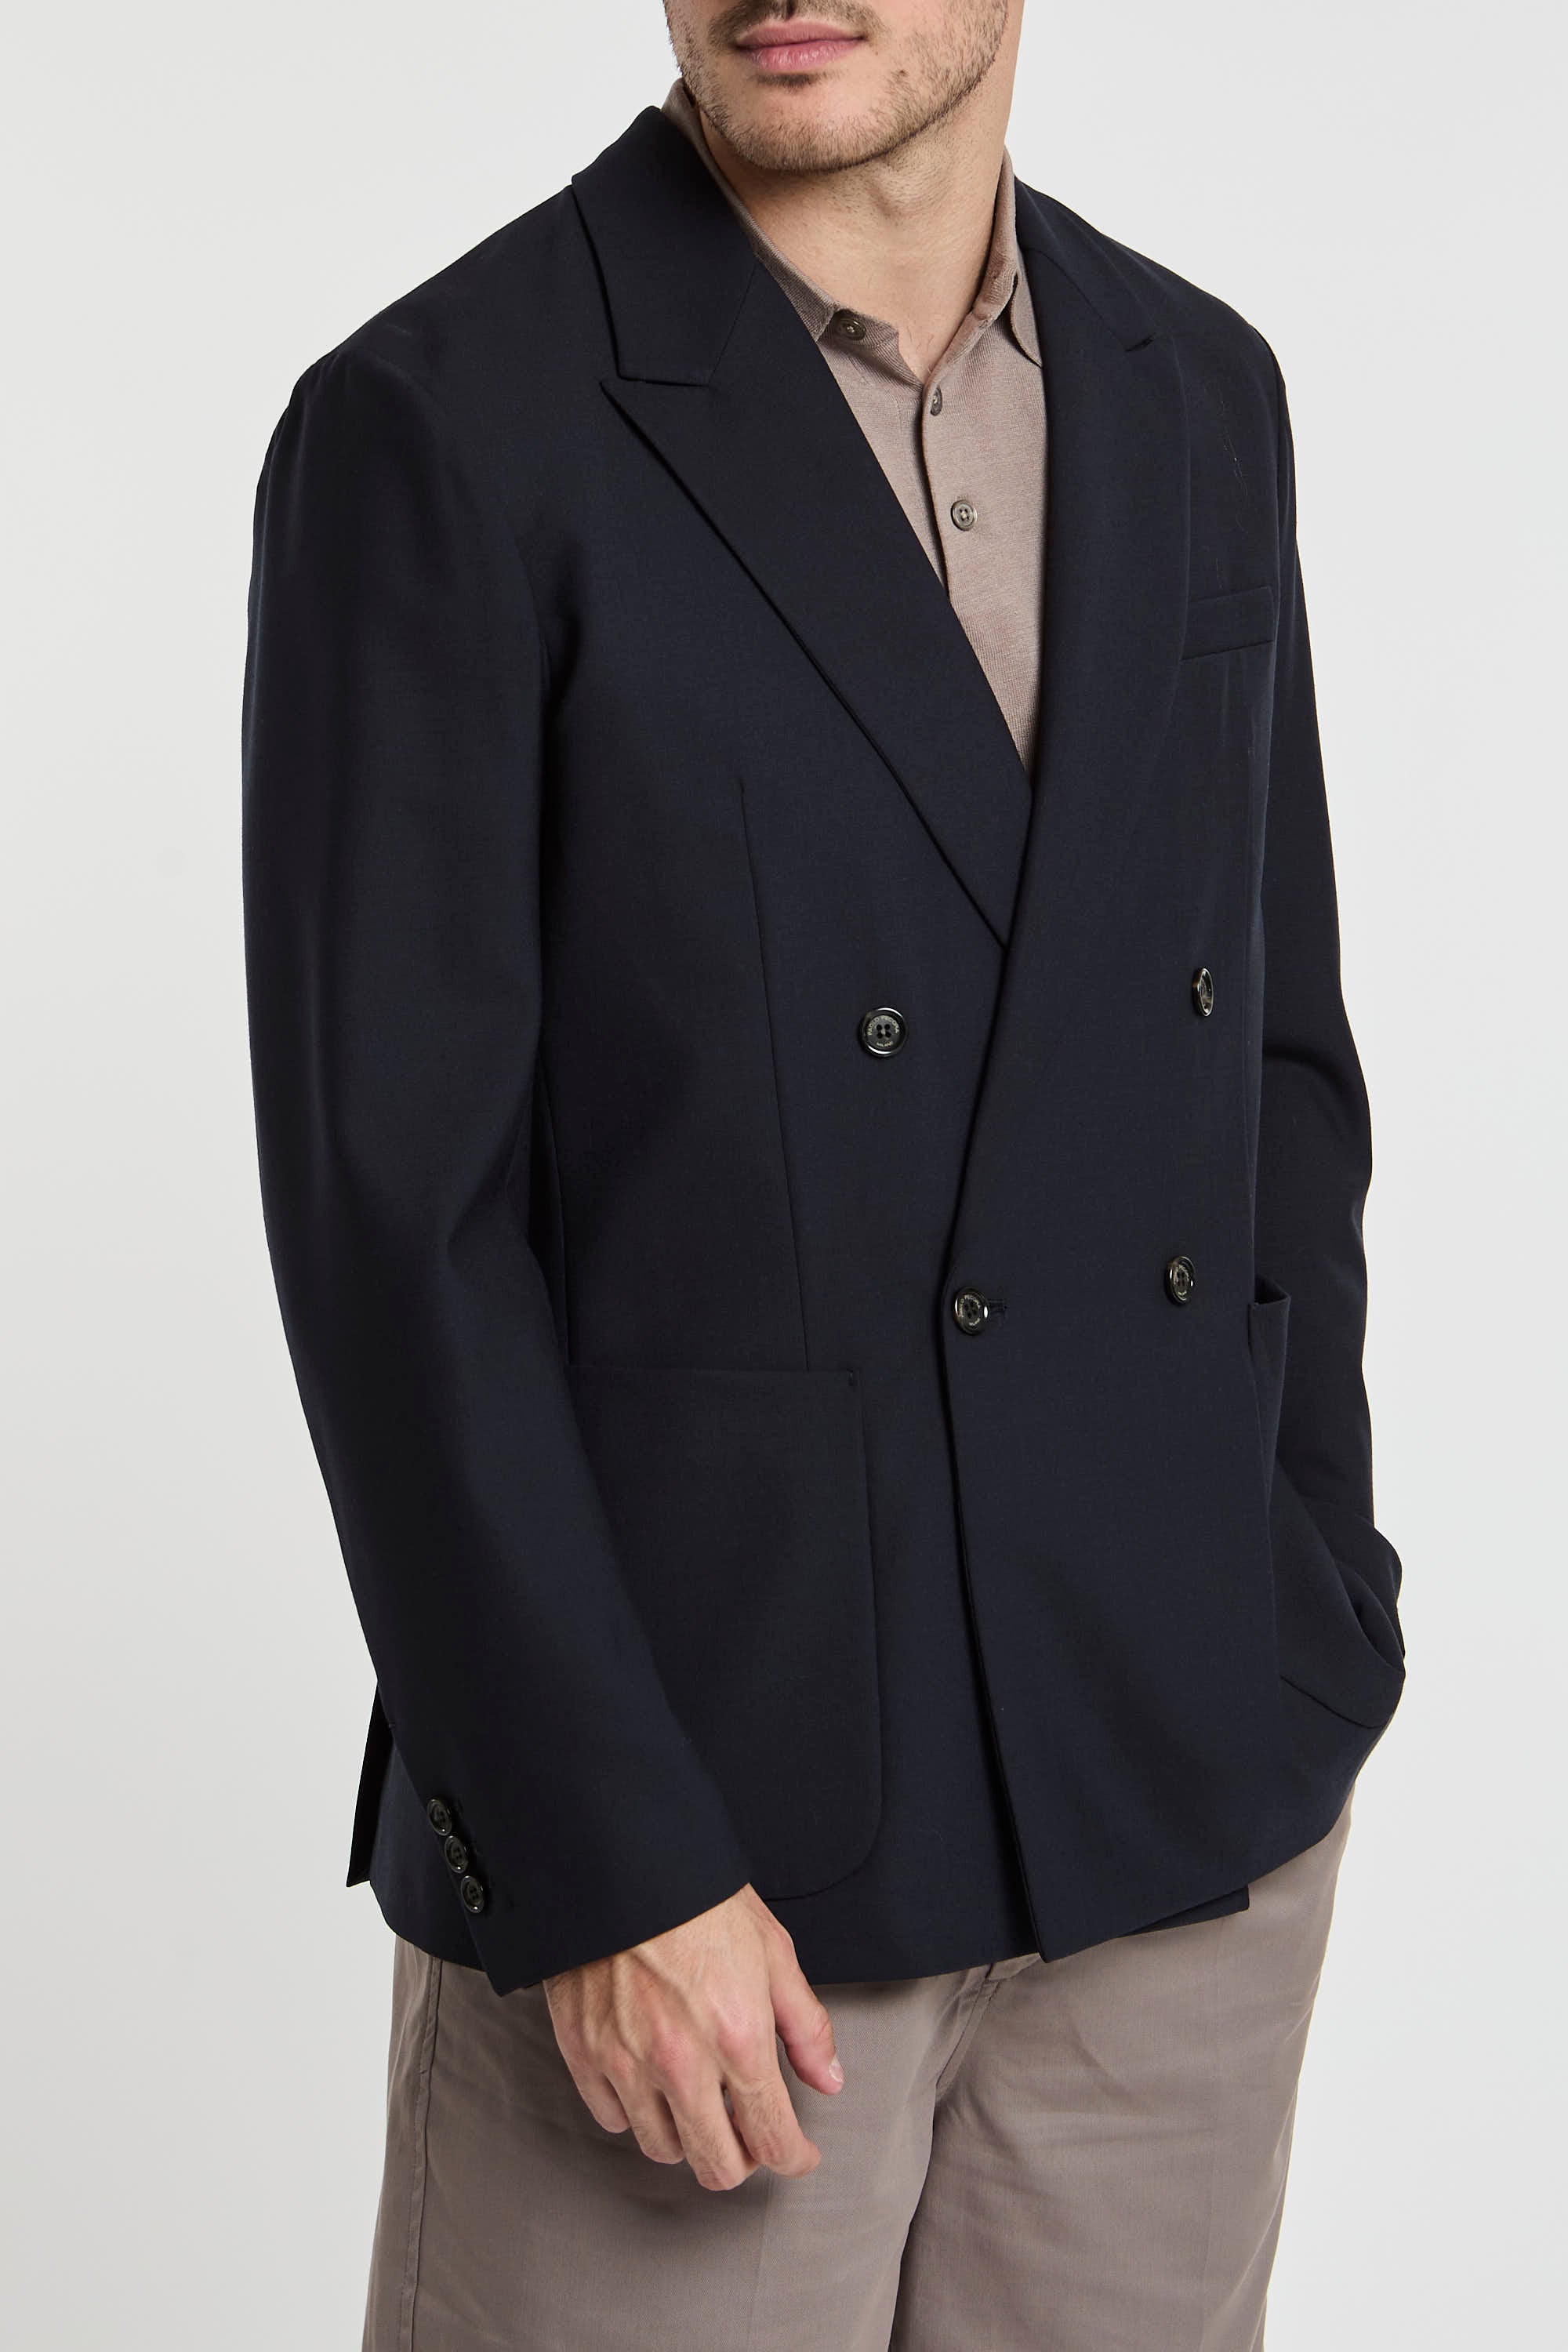 Paolo Pecora Double-Breasted Blue Jacket in Polyester/Wool/Elastane-1